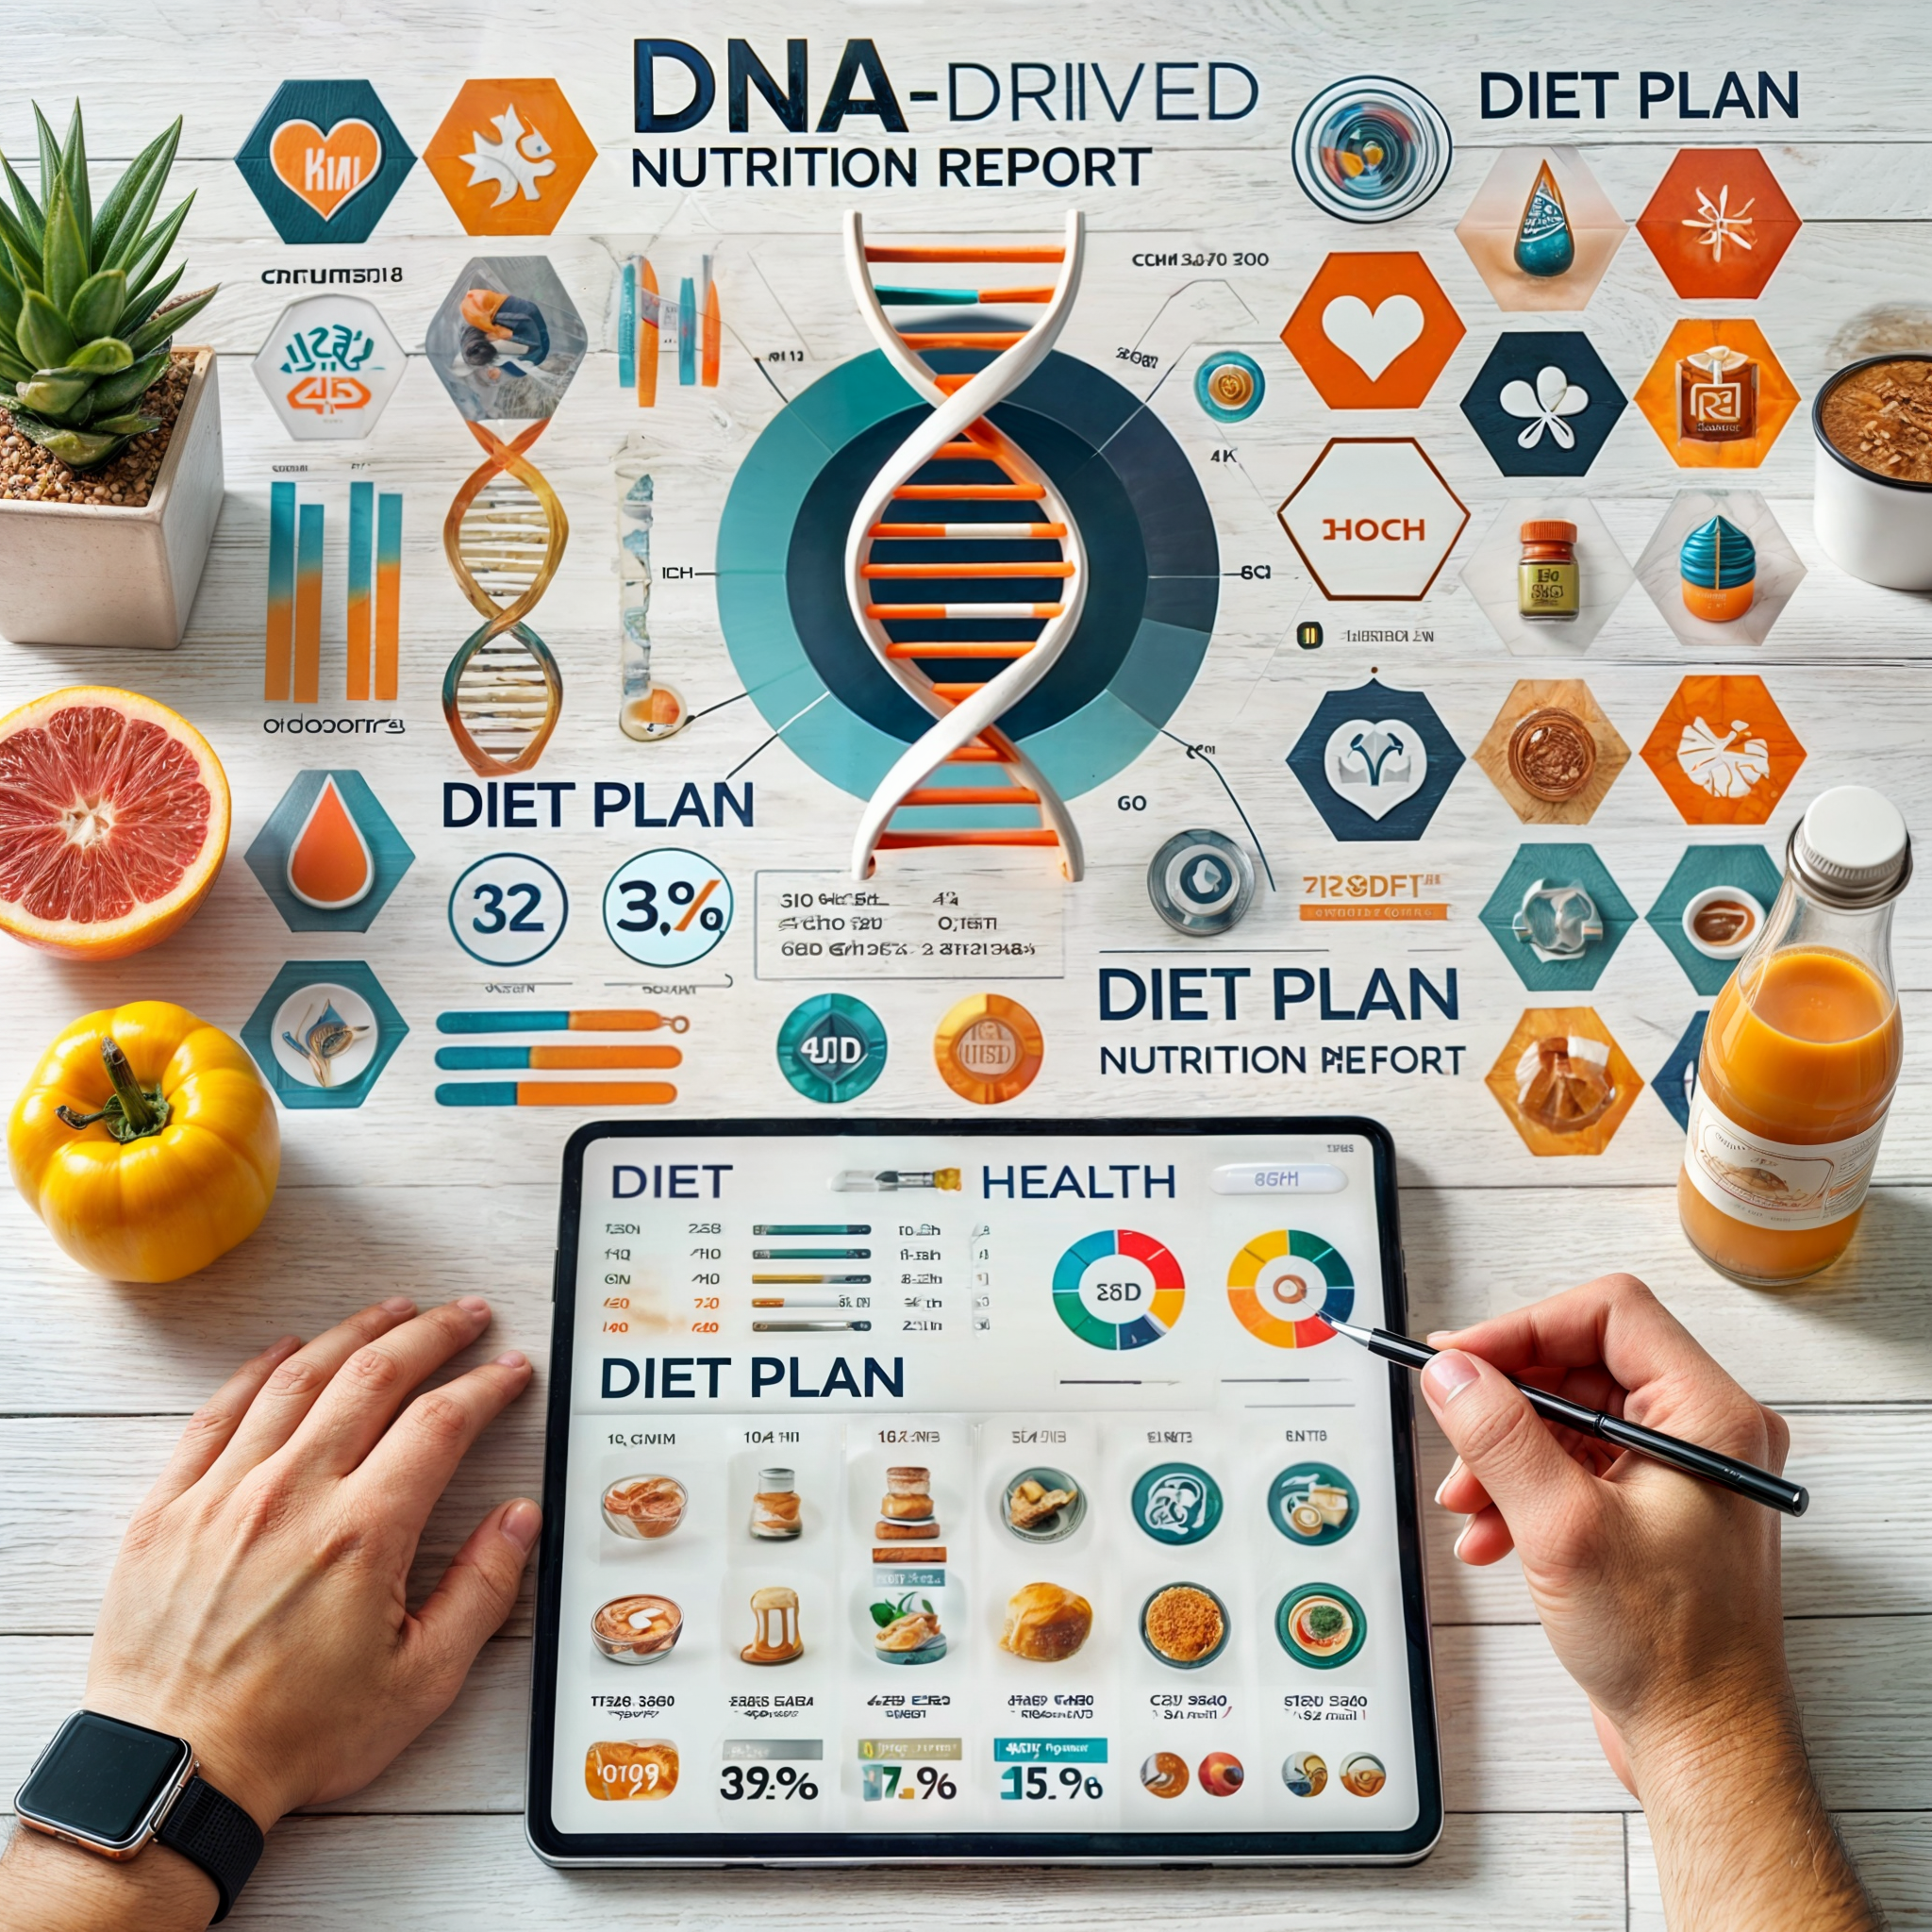 Case Study: Personalized DNA-Driven Nutrition Reports